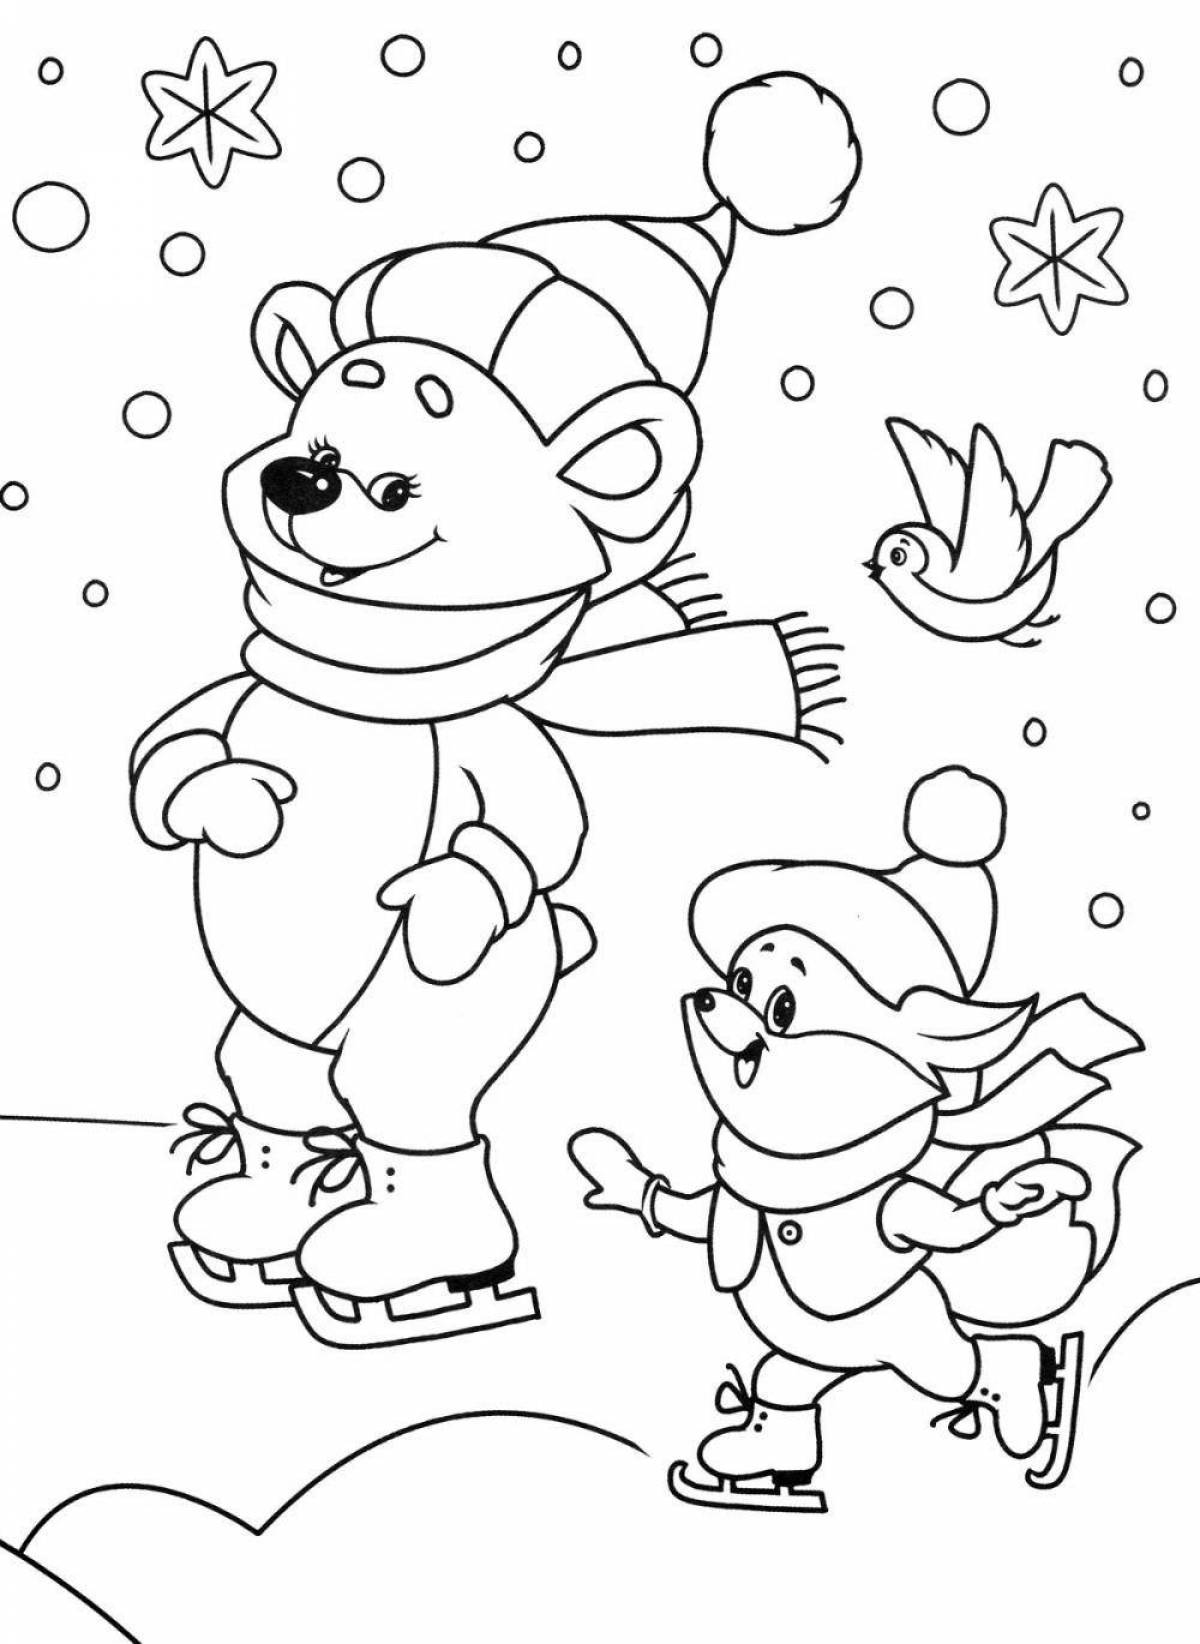 Glorious winter coloring book for children 4 years old